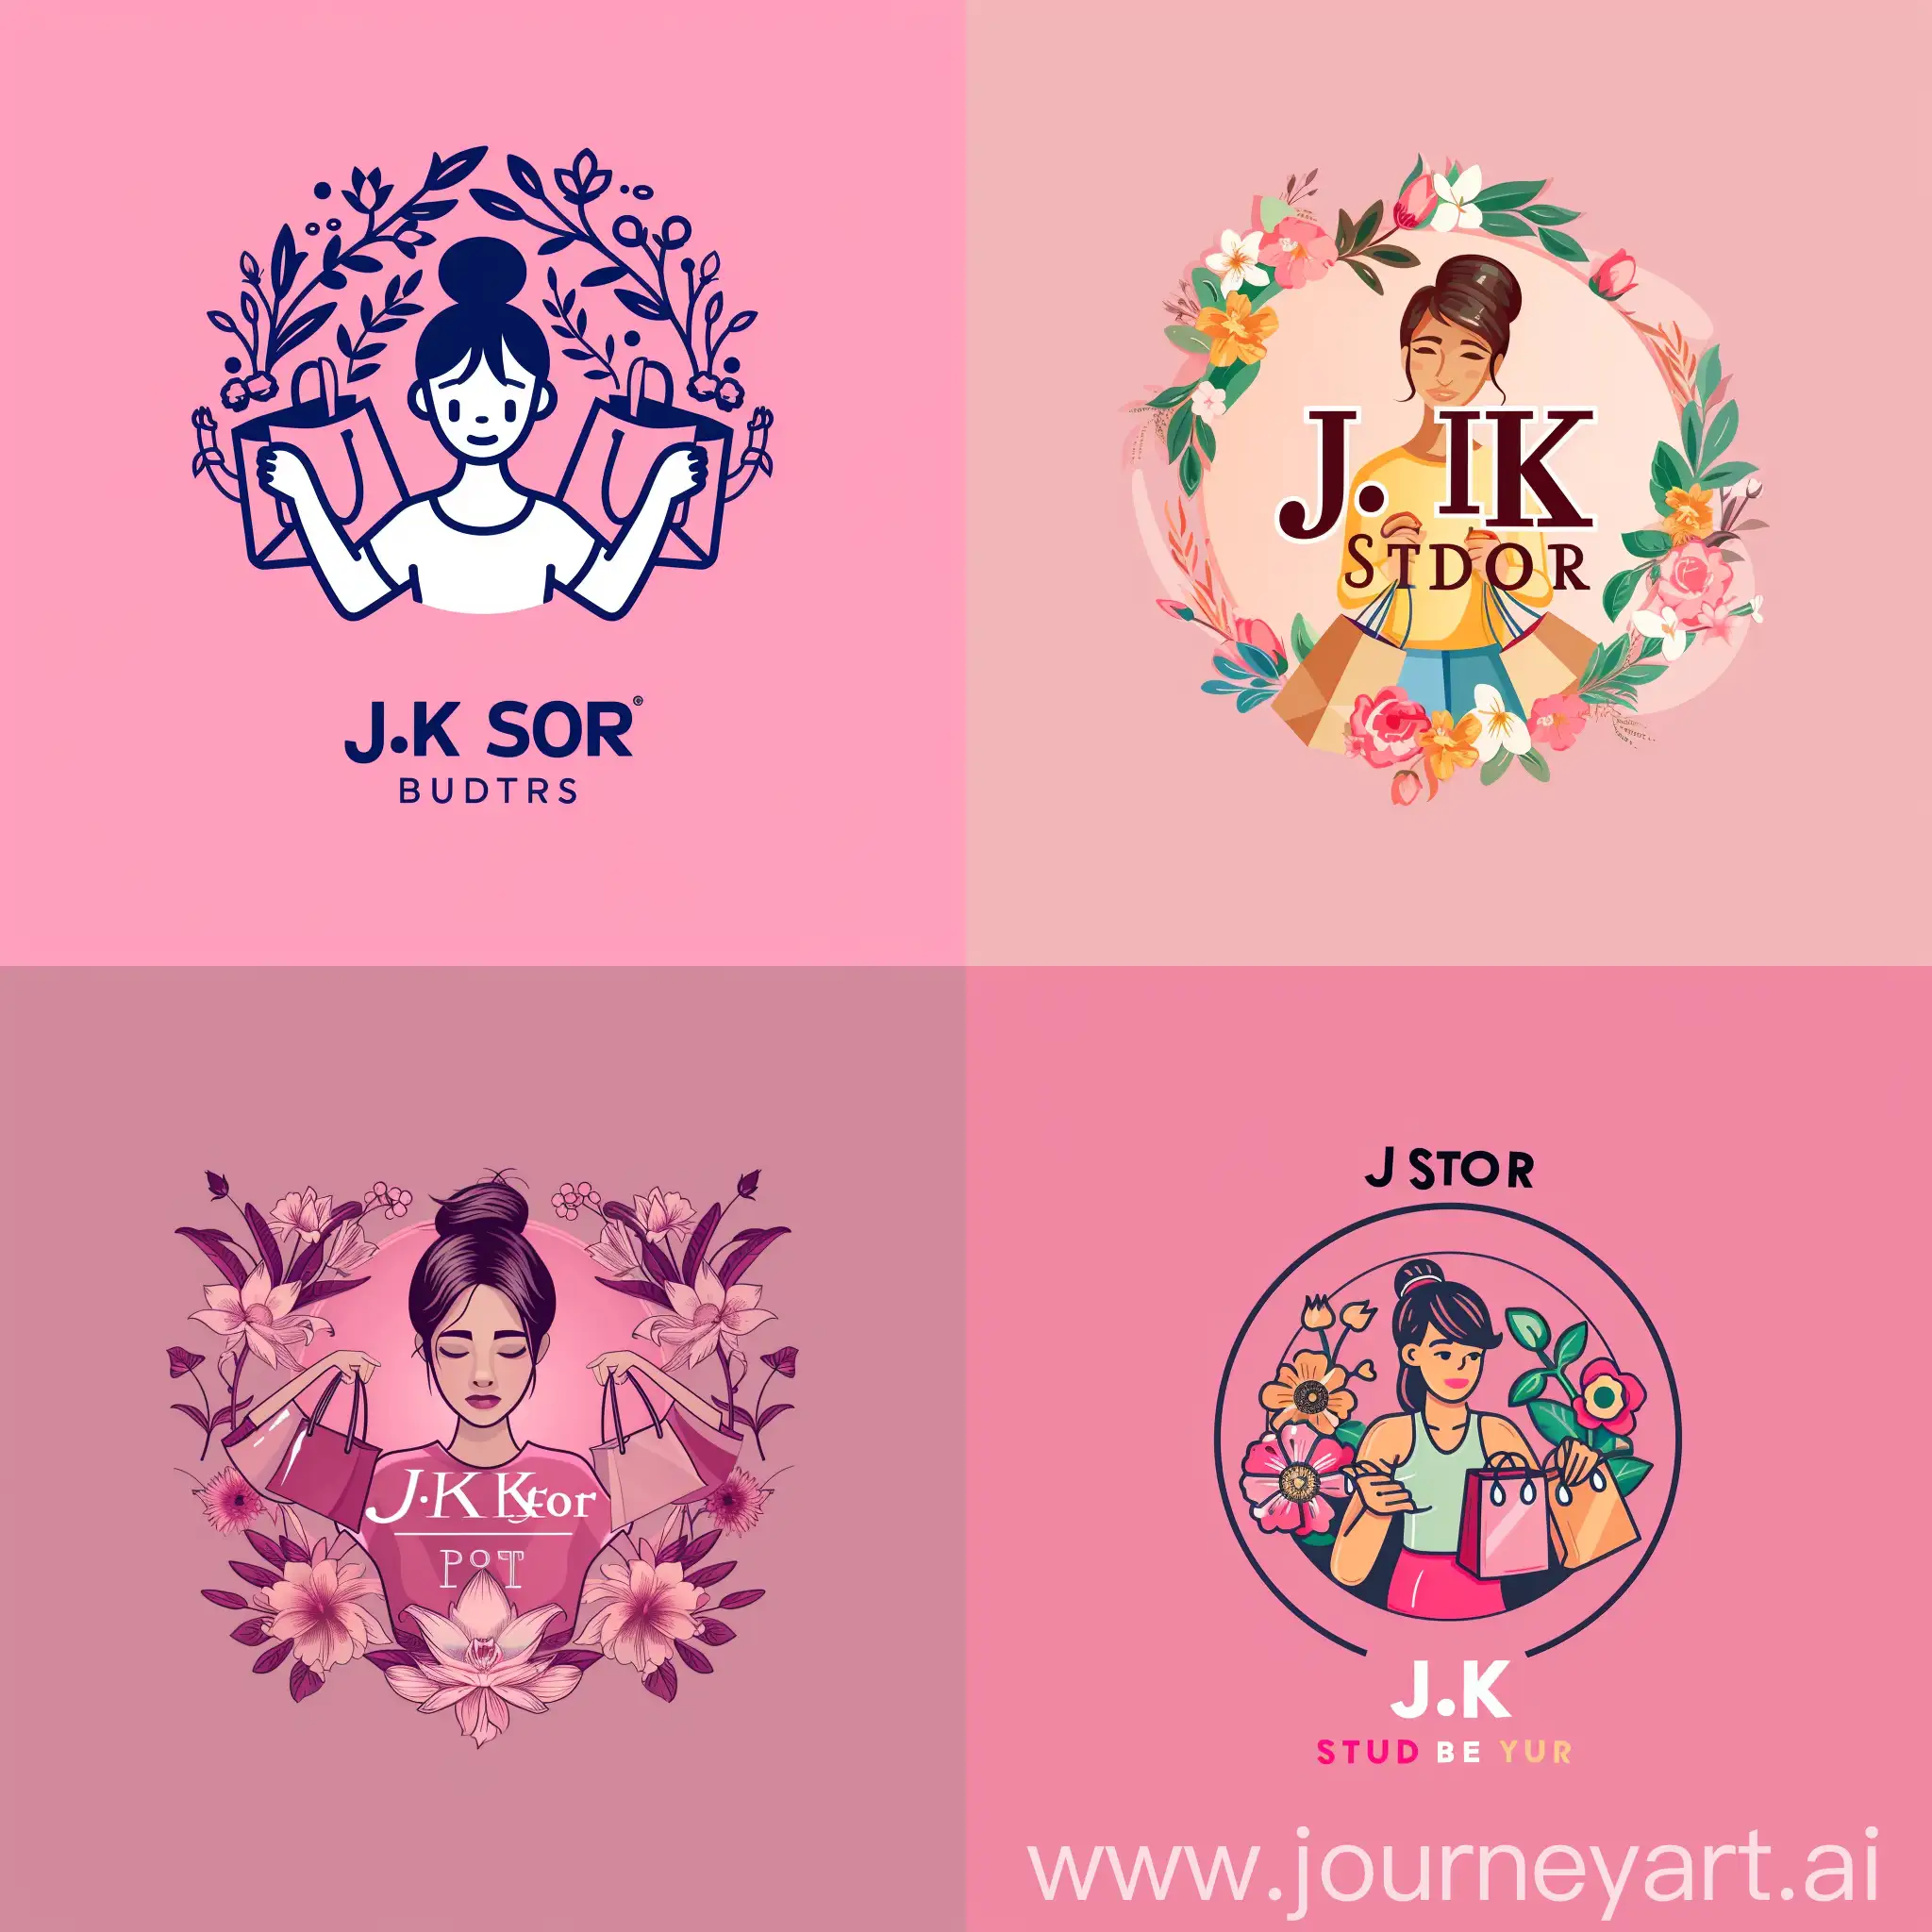 JK-Stor-Studio-Logo-Woman-Shopping-with-Pink-Floral-Background